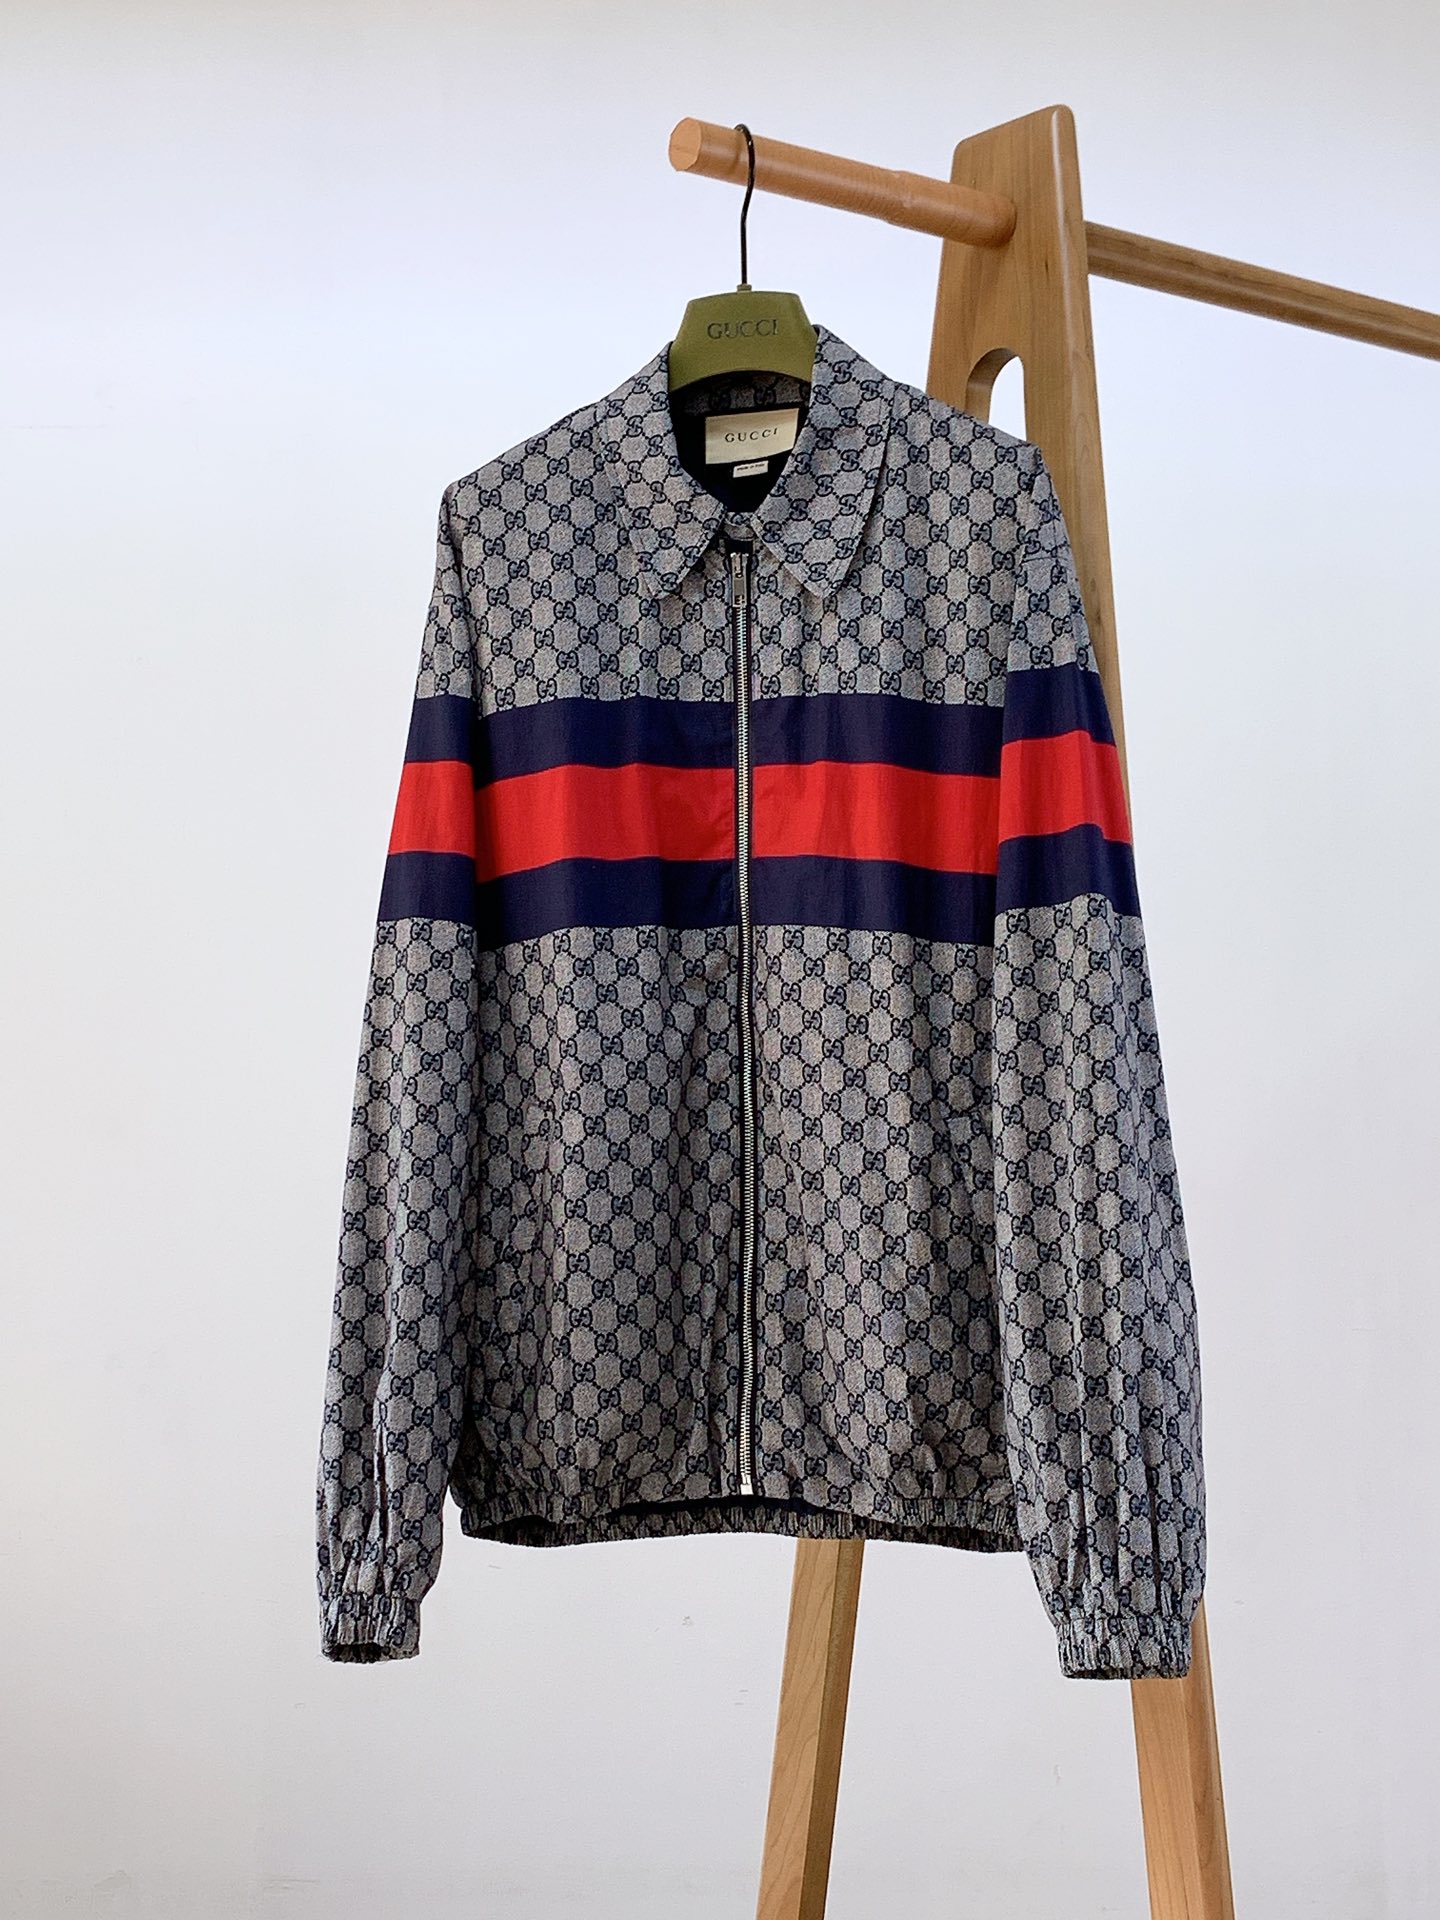 Gucci Top
 Clothing Coats & Jackets Printing Spring/Summer Collection Fashion Casual